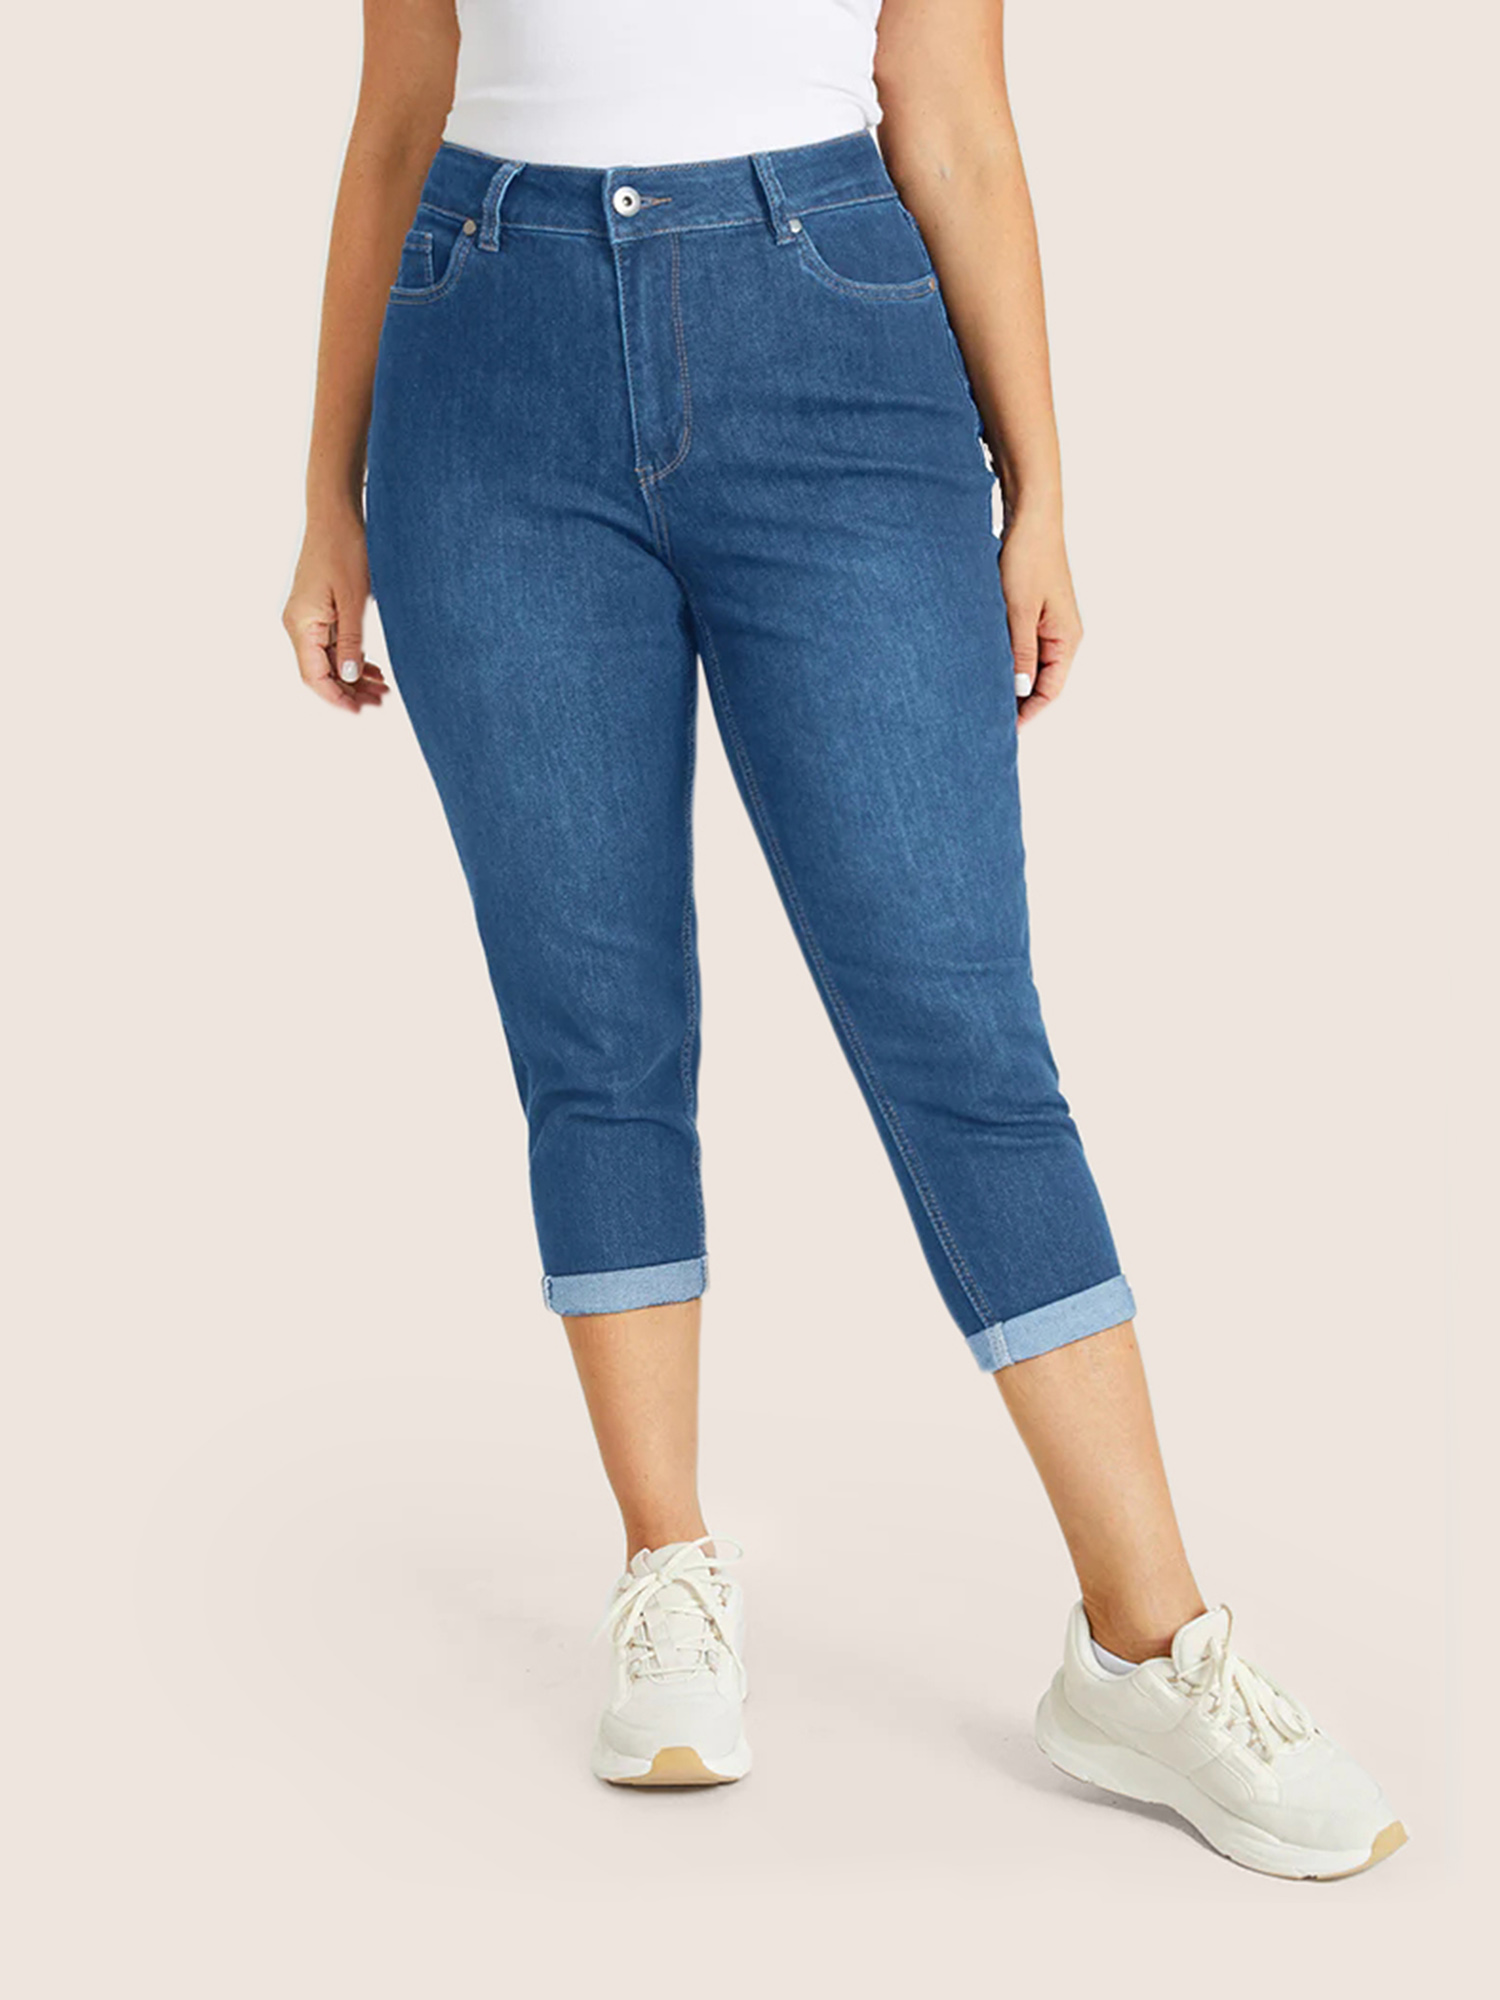 

Plus Size Very Stretchy High Rise Dark Wash Cropped Jeans Women Blue Casual Plain High stretch Slanted pocket Jeans BloomChic